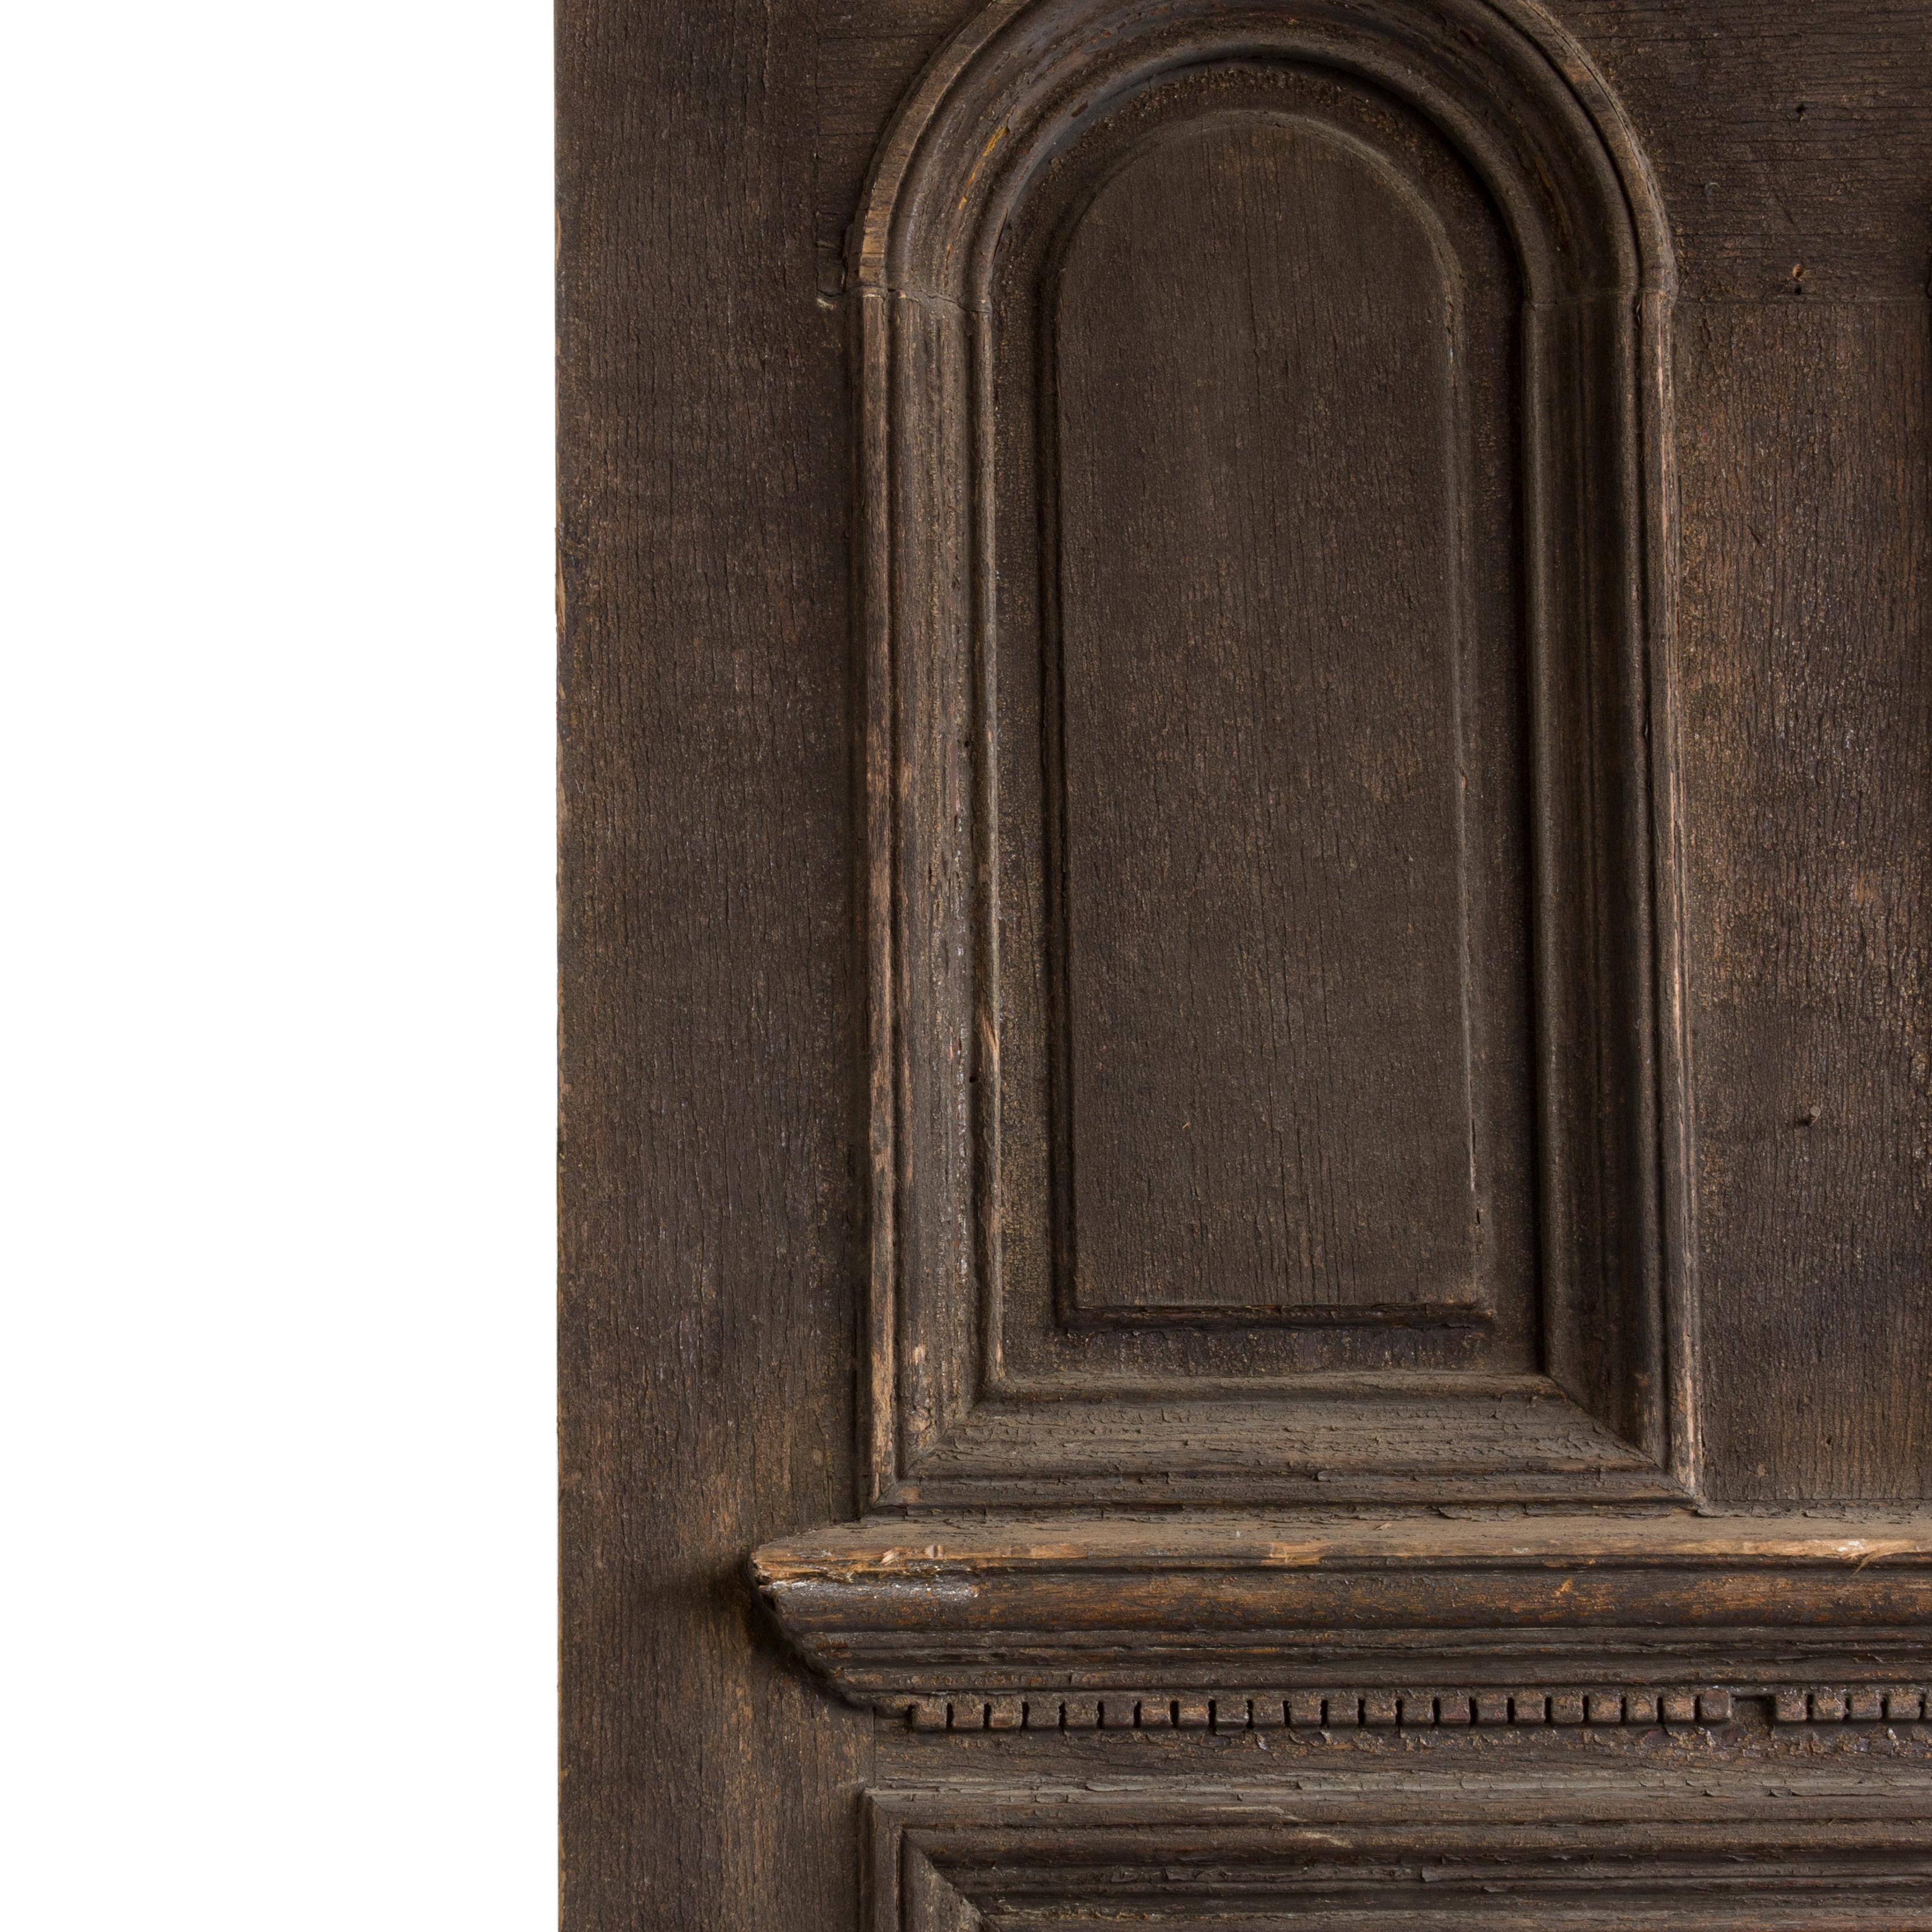 This solid and heavy solid oak door has great architectural accents. Deep recessed panelling and a dentiled cornice ledge create a visually imposing door with beautiful antique character. Salvaged from a church in New England.